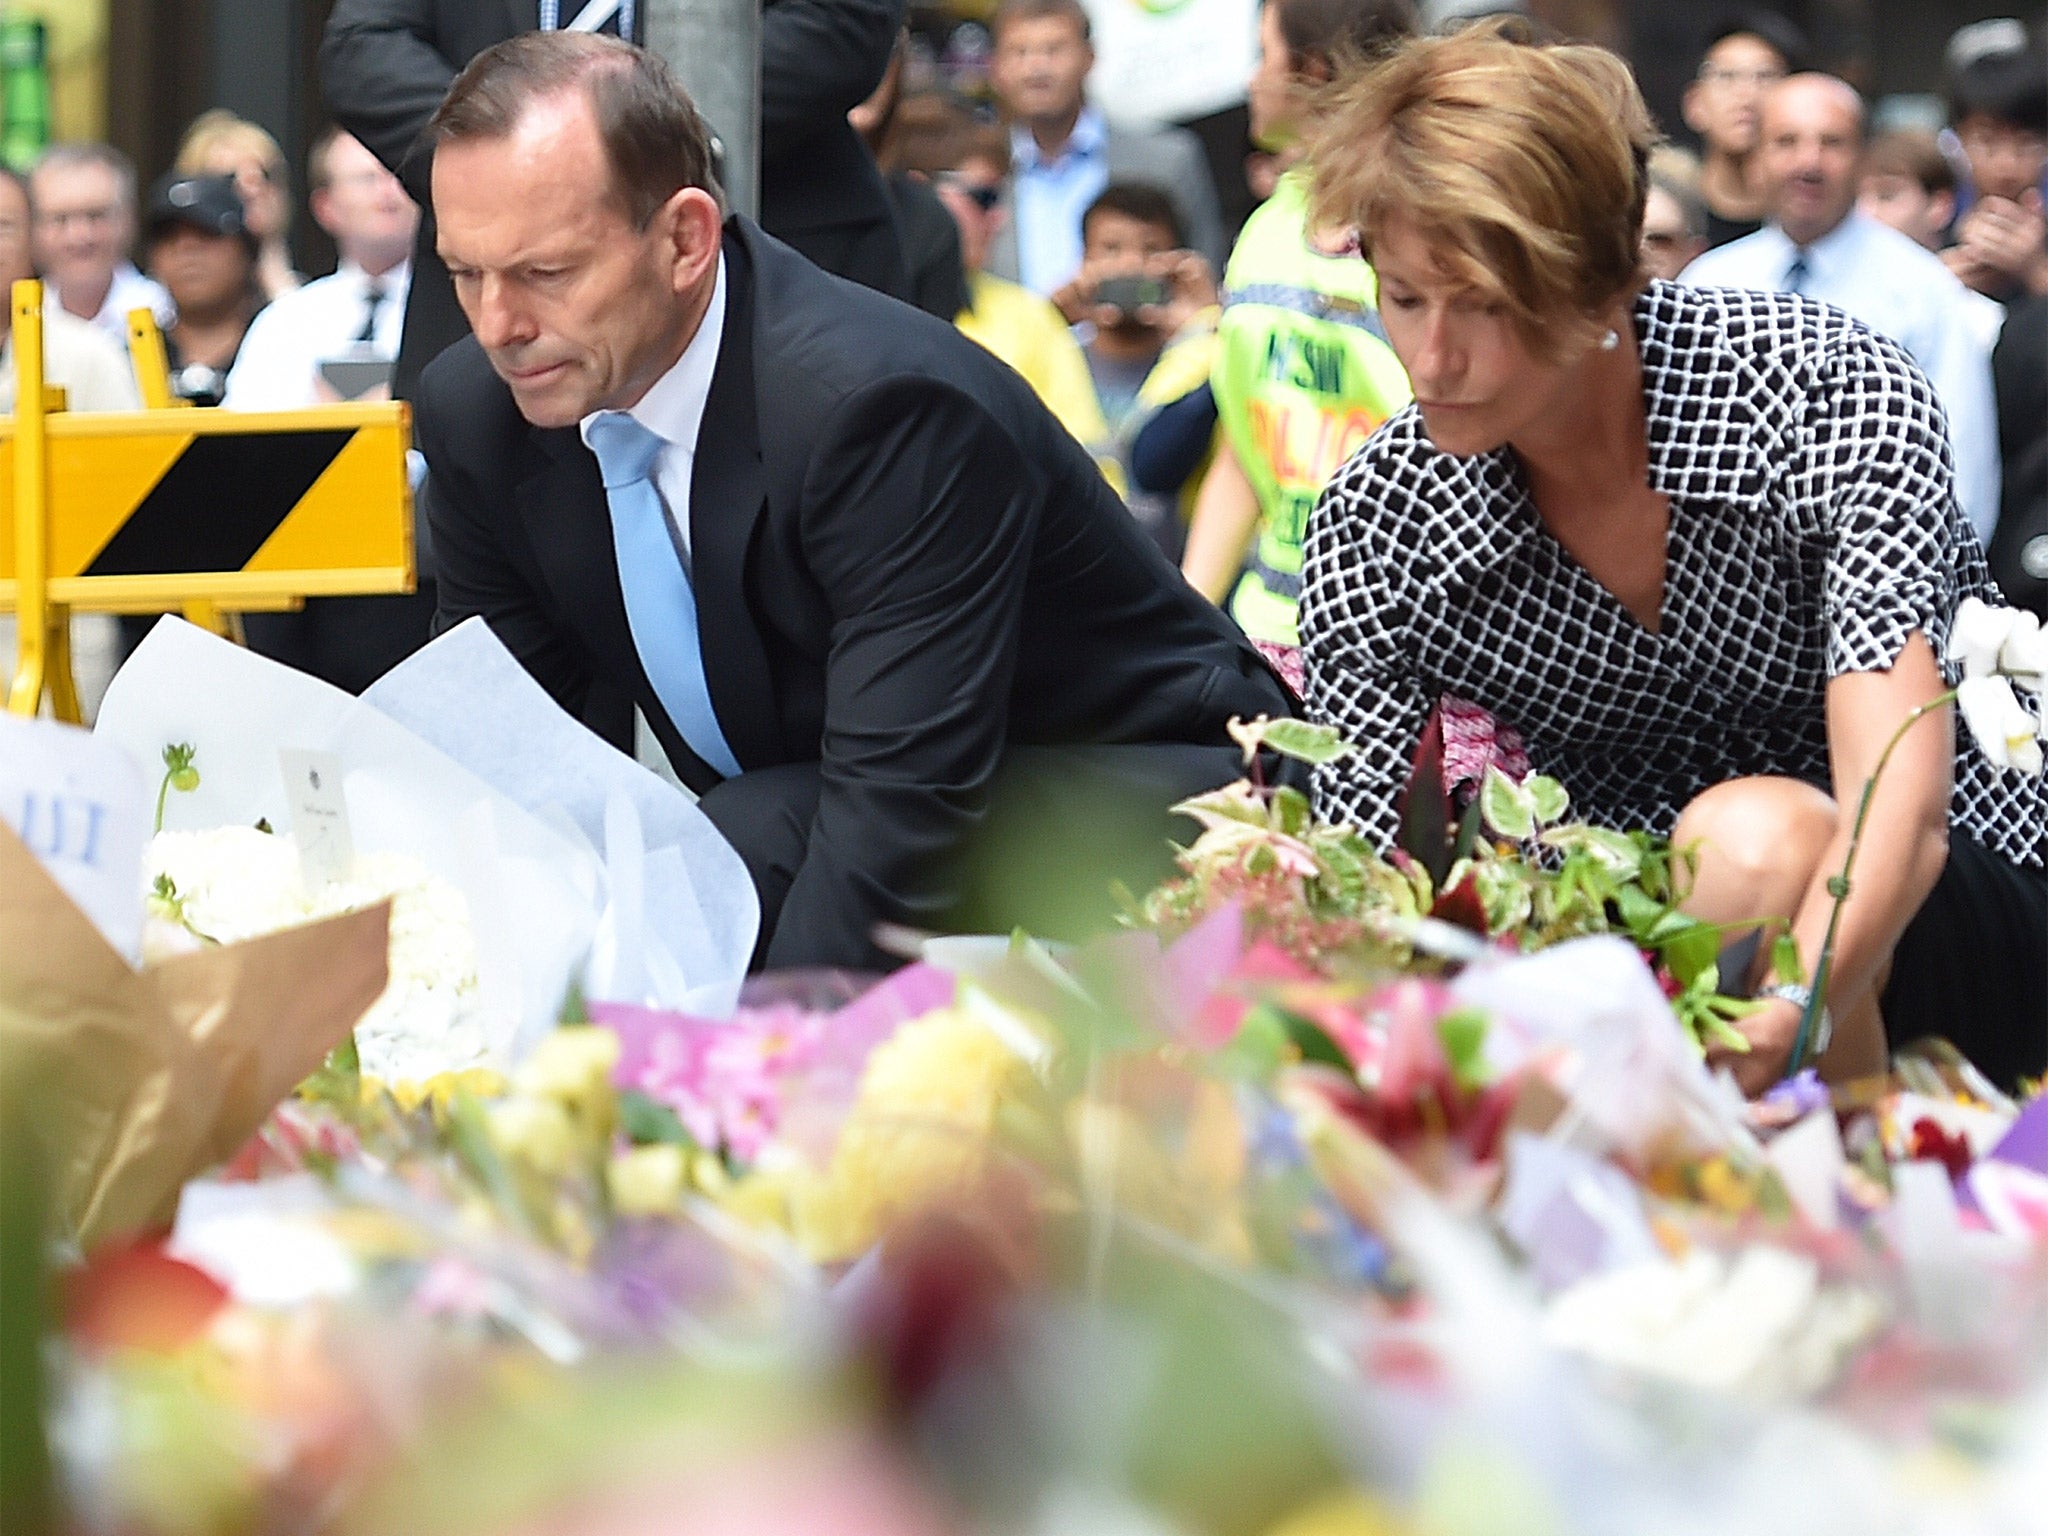 Australian Prime Minister Tony Abbott and his wife Margaret lay wreaths near the scene of the fatal siege